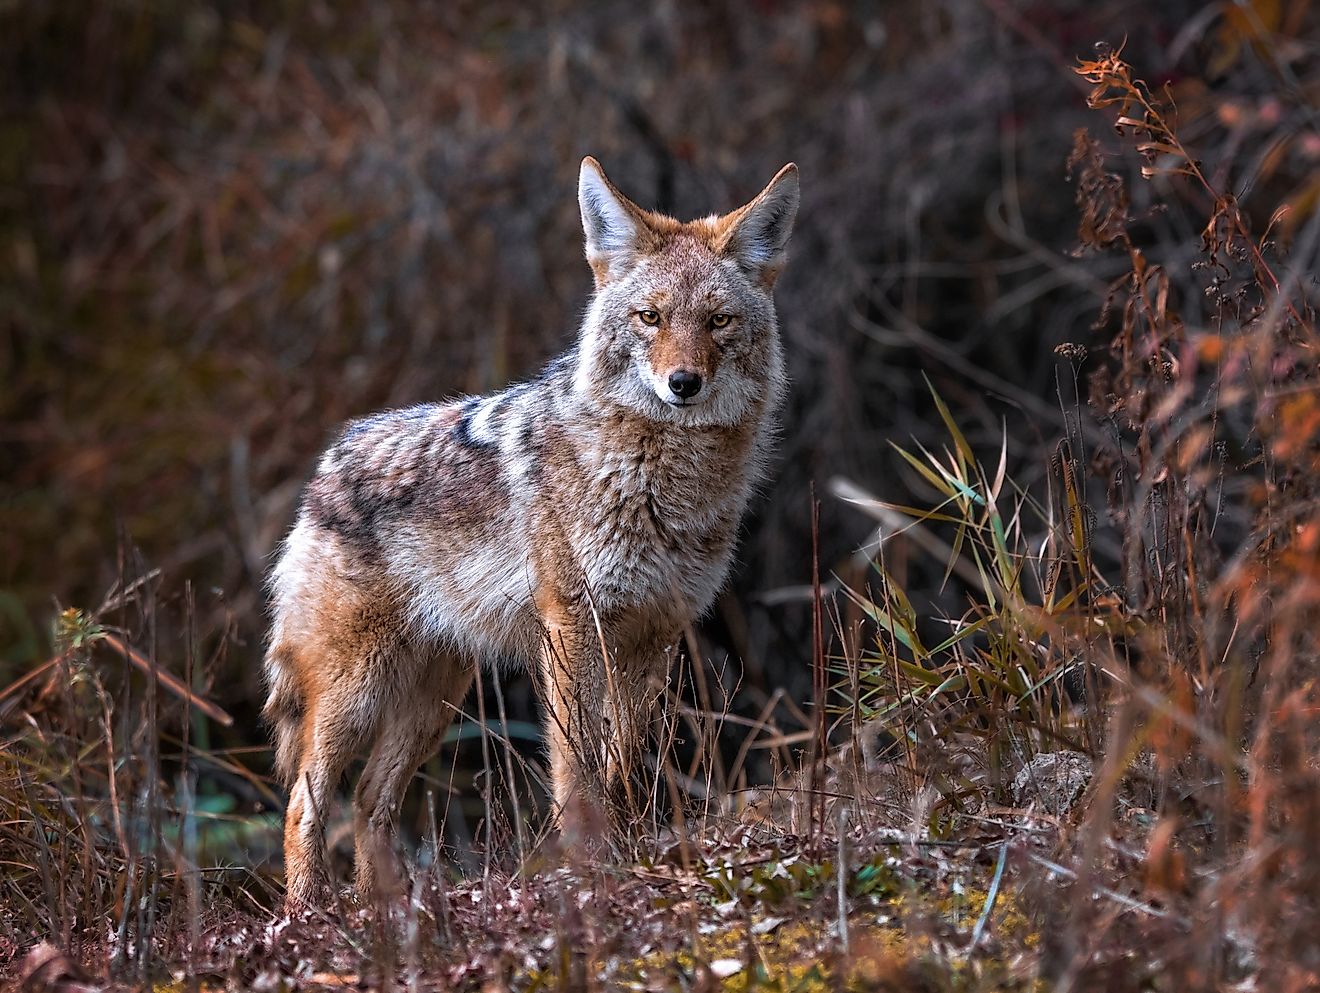 Stunning image of a wild coyote in its natural habitat.